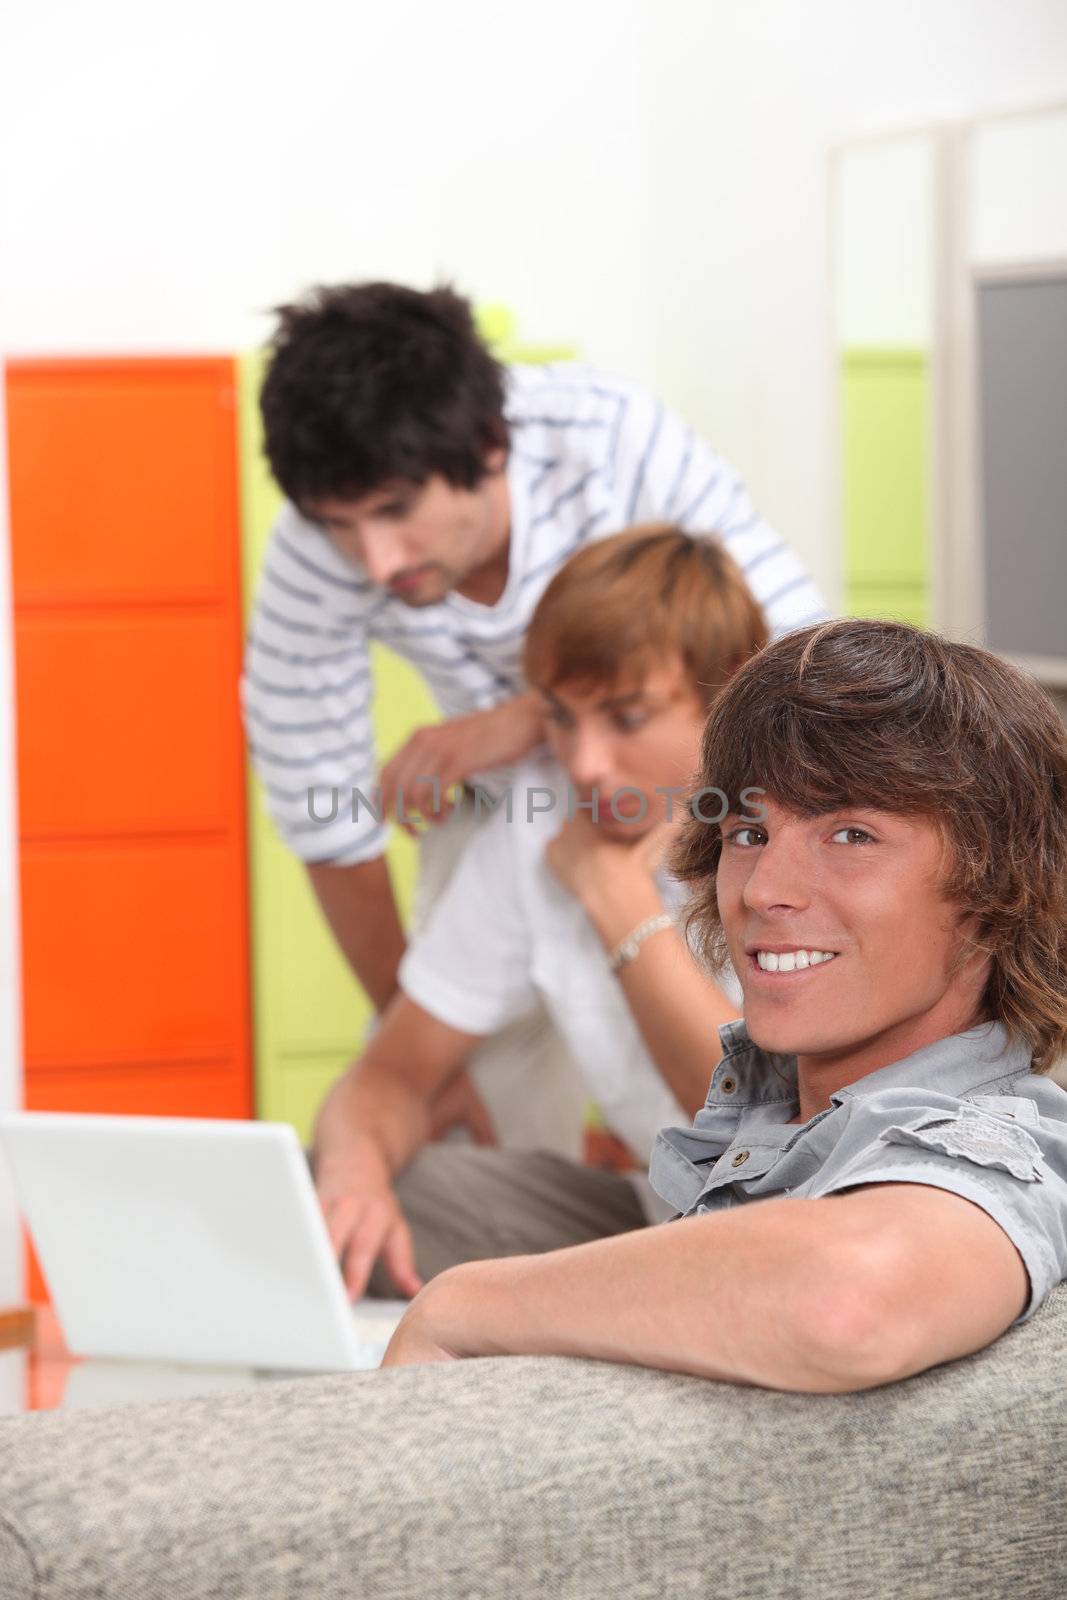 Lads at home with a laptop computer by phovoir